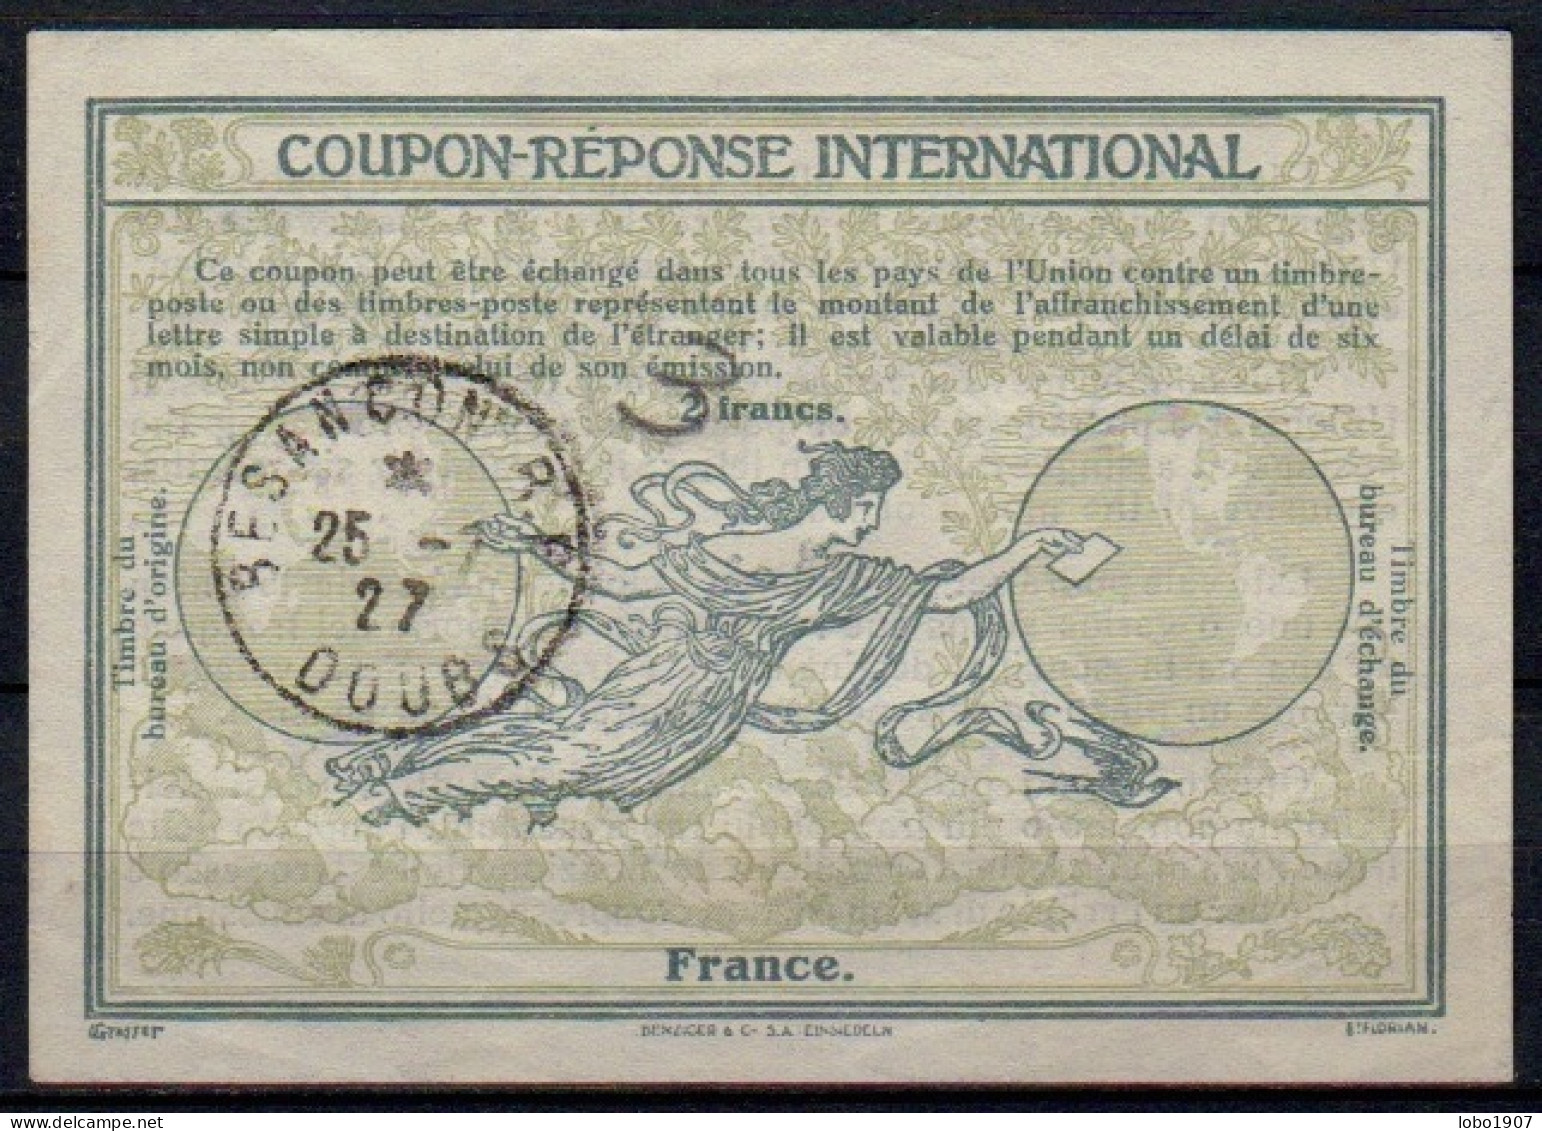 FRANCE  Ro8  3 / 2 Francs.  International Reply Coupon Reponse Antwortschein IRC IAS Cupon Respuesta O BESANÇON DOUBS 25 - Coupons-réponse